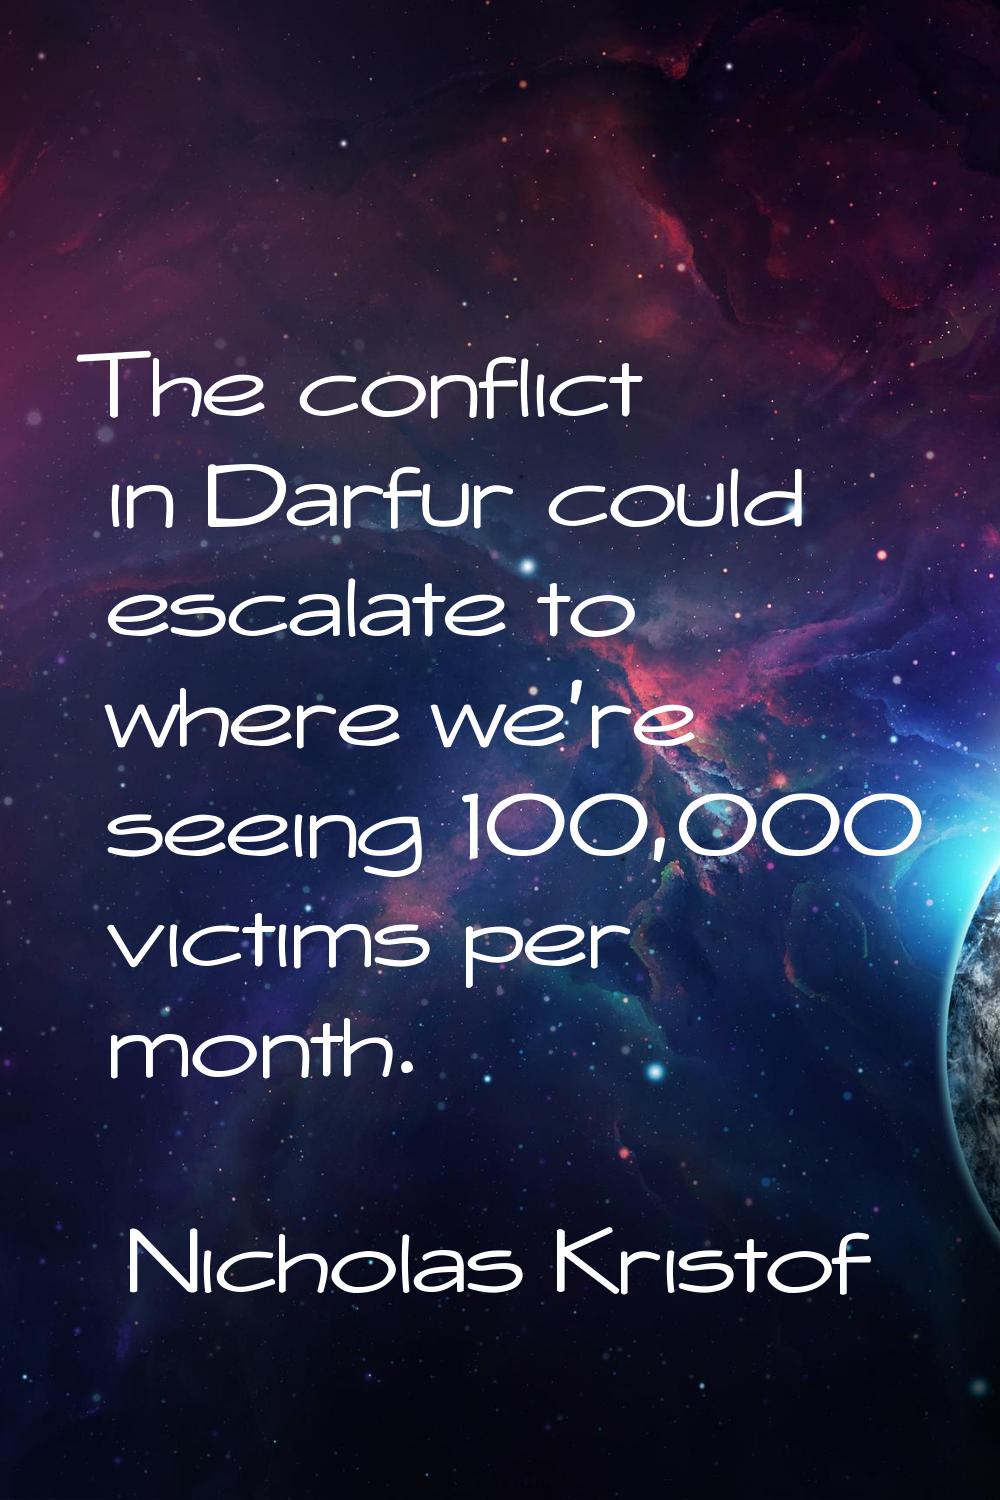 The conflict in Darfur could escalate to where we're seeing 100,000 victims per month.